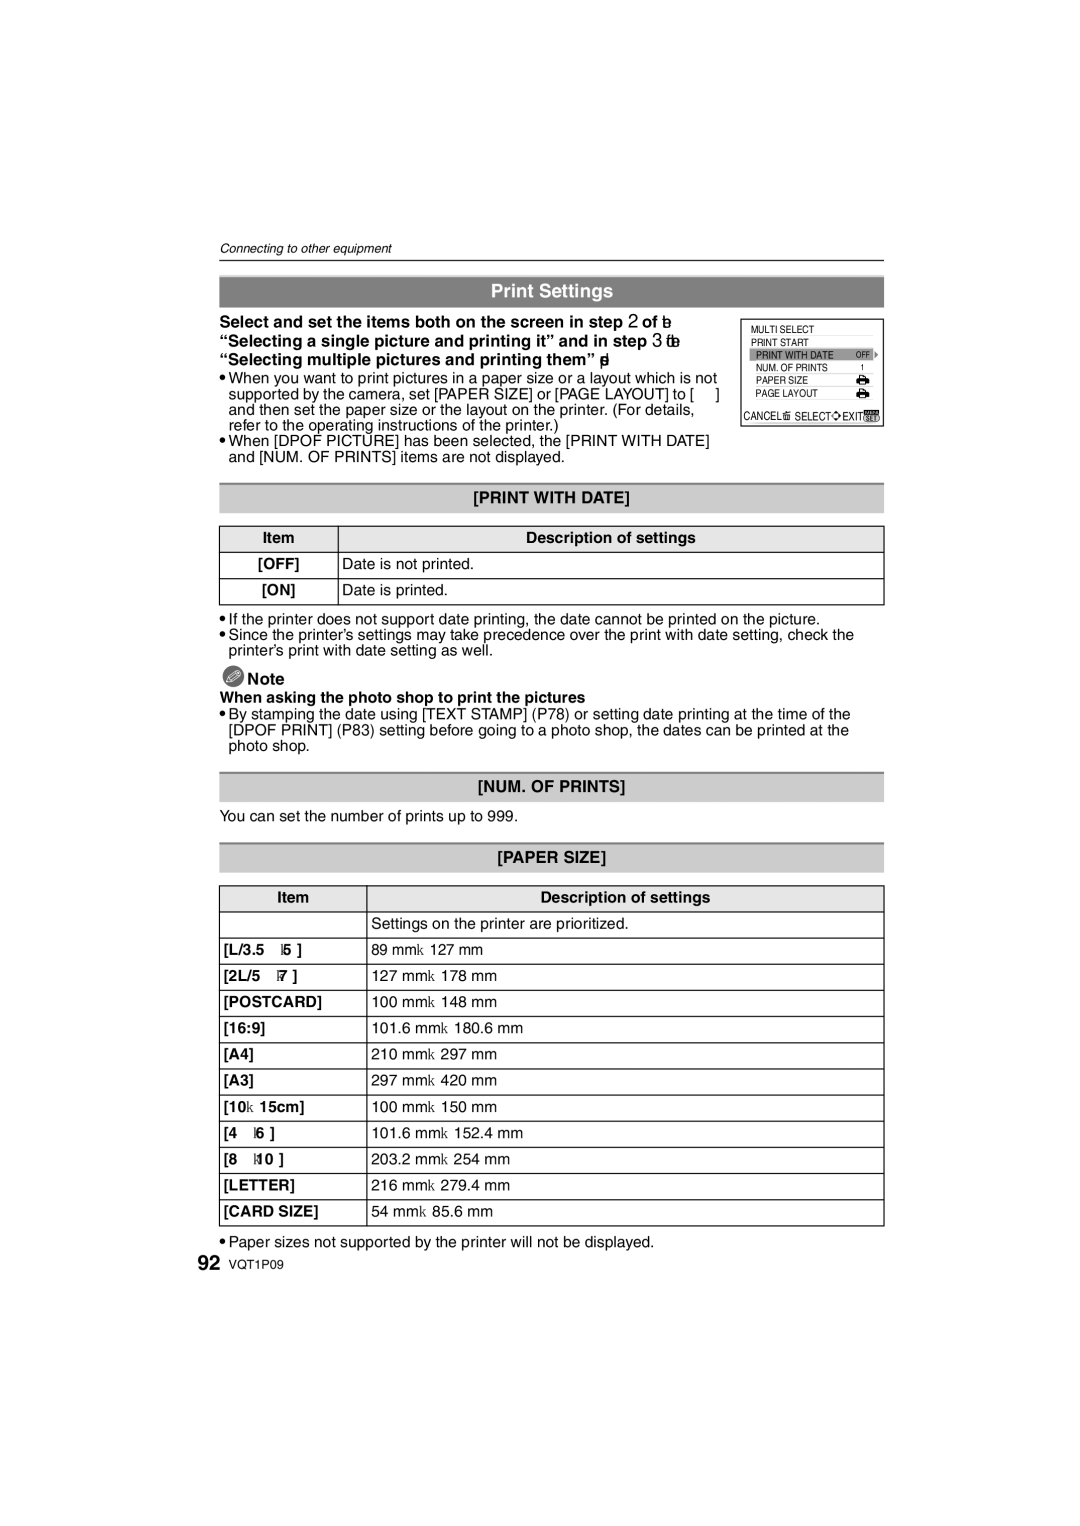 Panasonic DMC-FX35 Print Settings, Select and set the items both on the screen, Print with Date, NUM. of Prints 